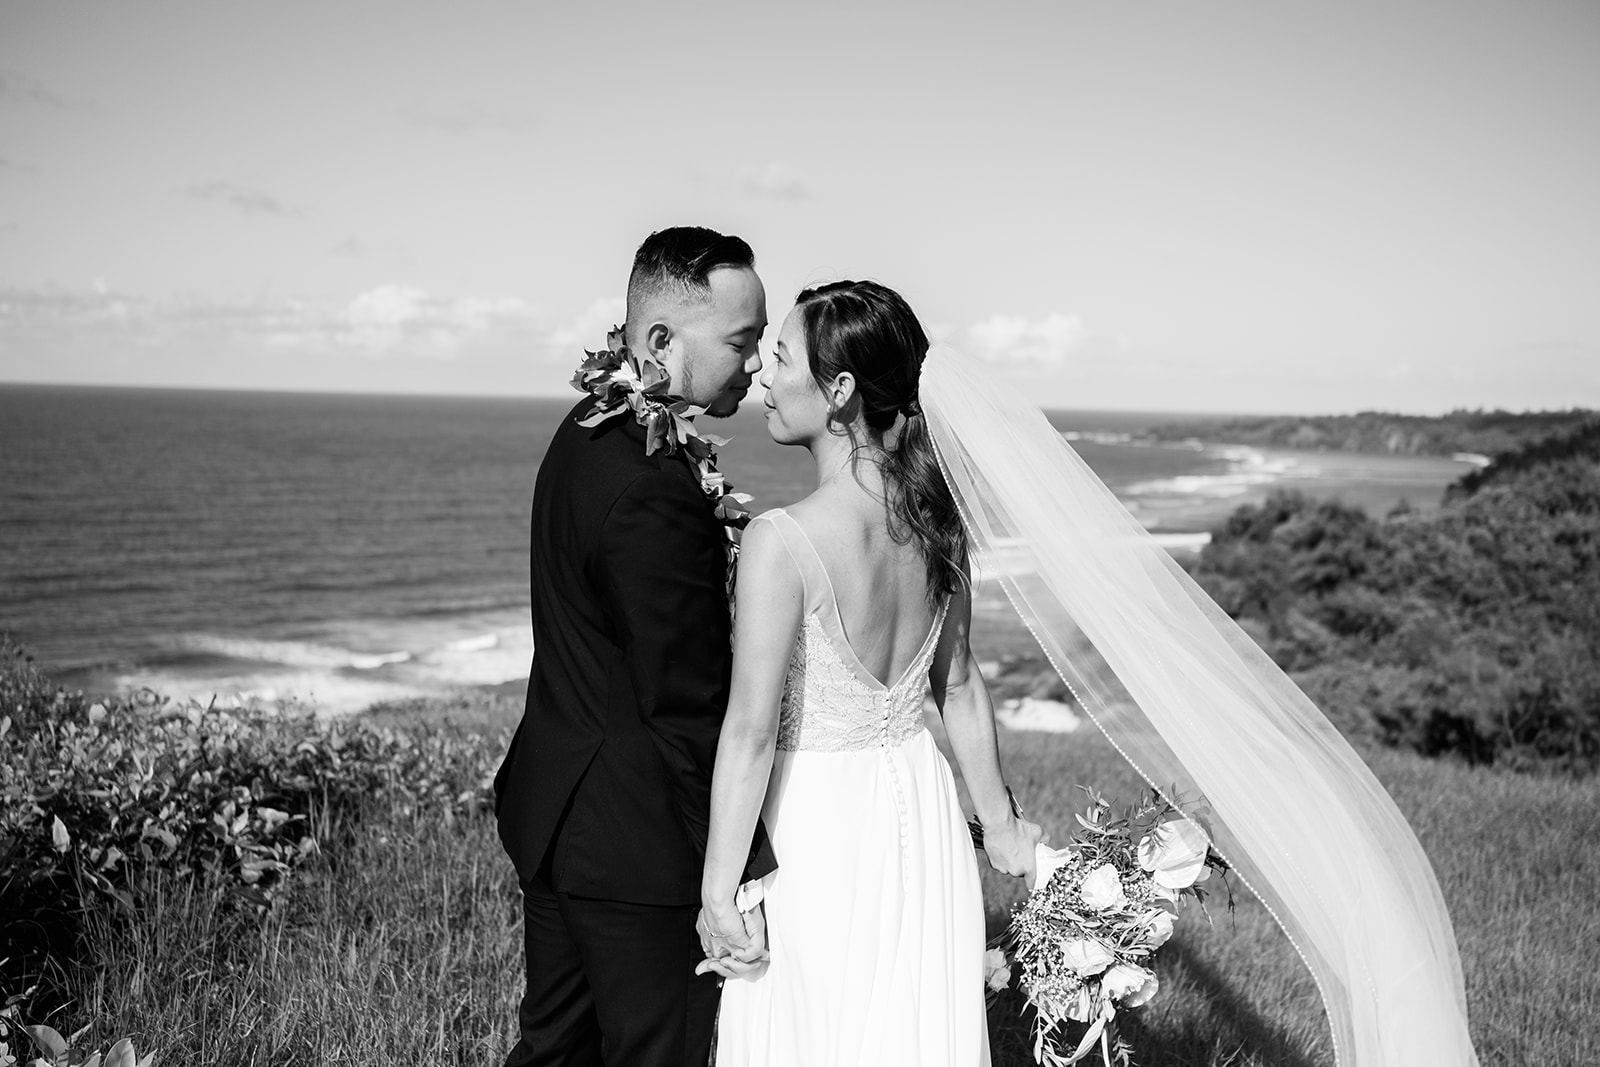 A monochrome photo of a bride and groom share a kiss on a scenic coastline, with the bride's veil caught in the breeze.